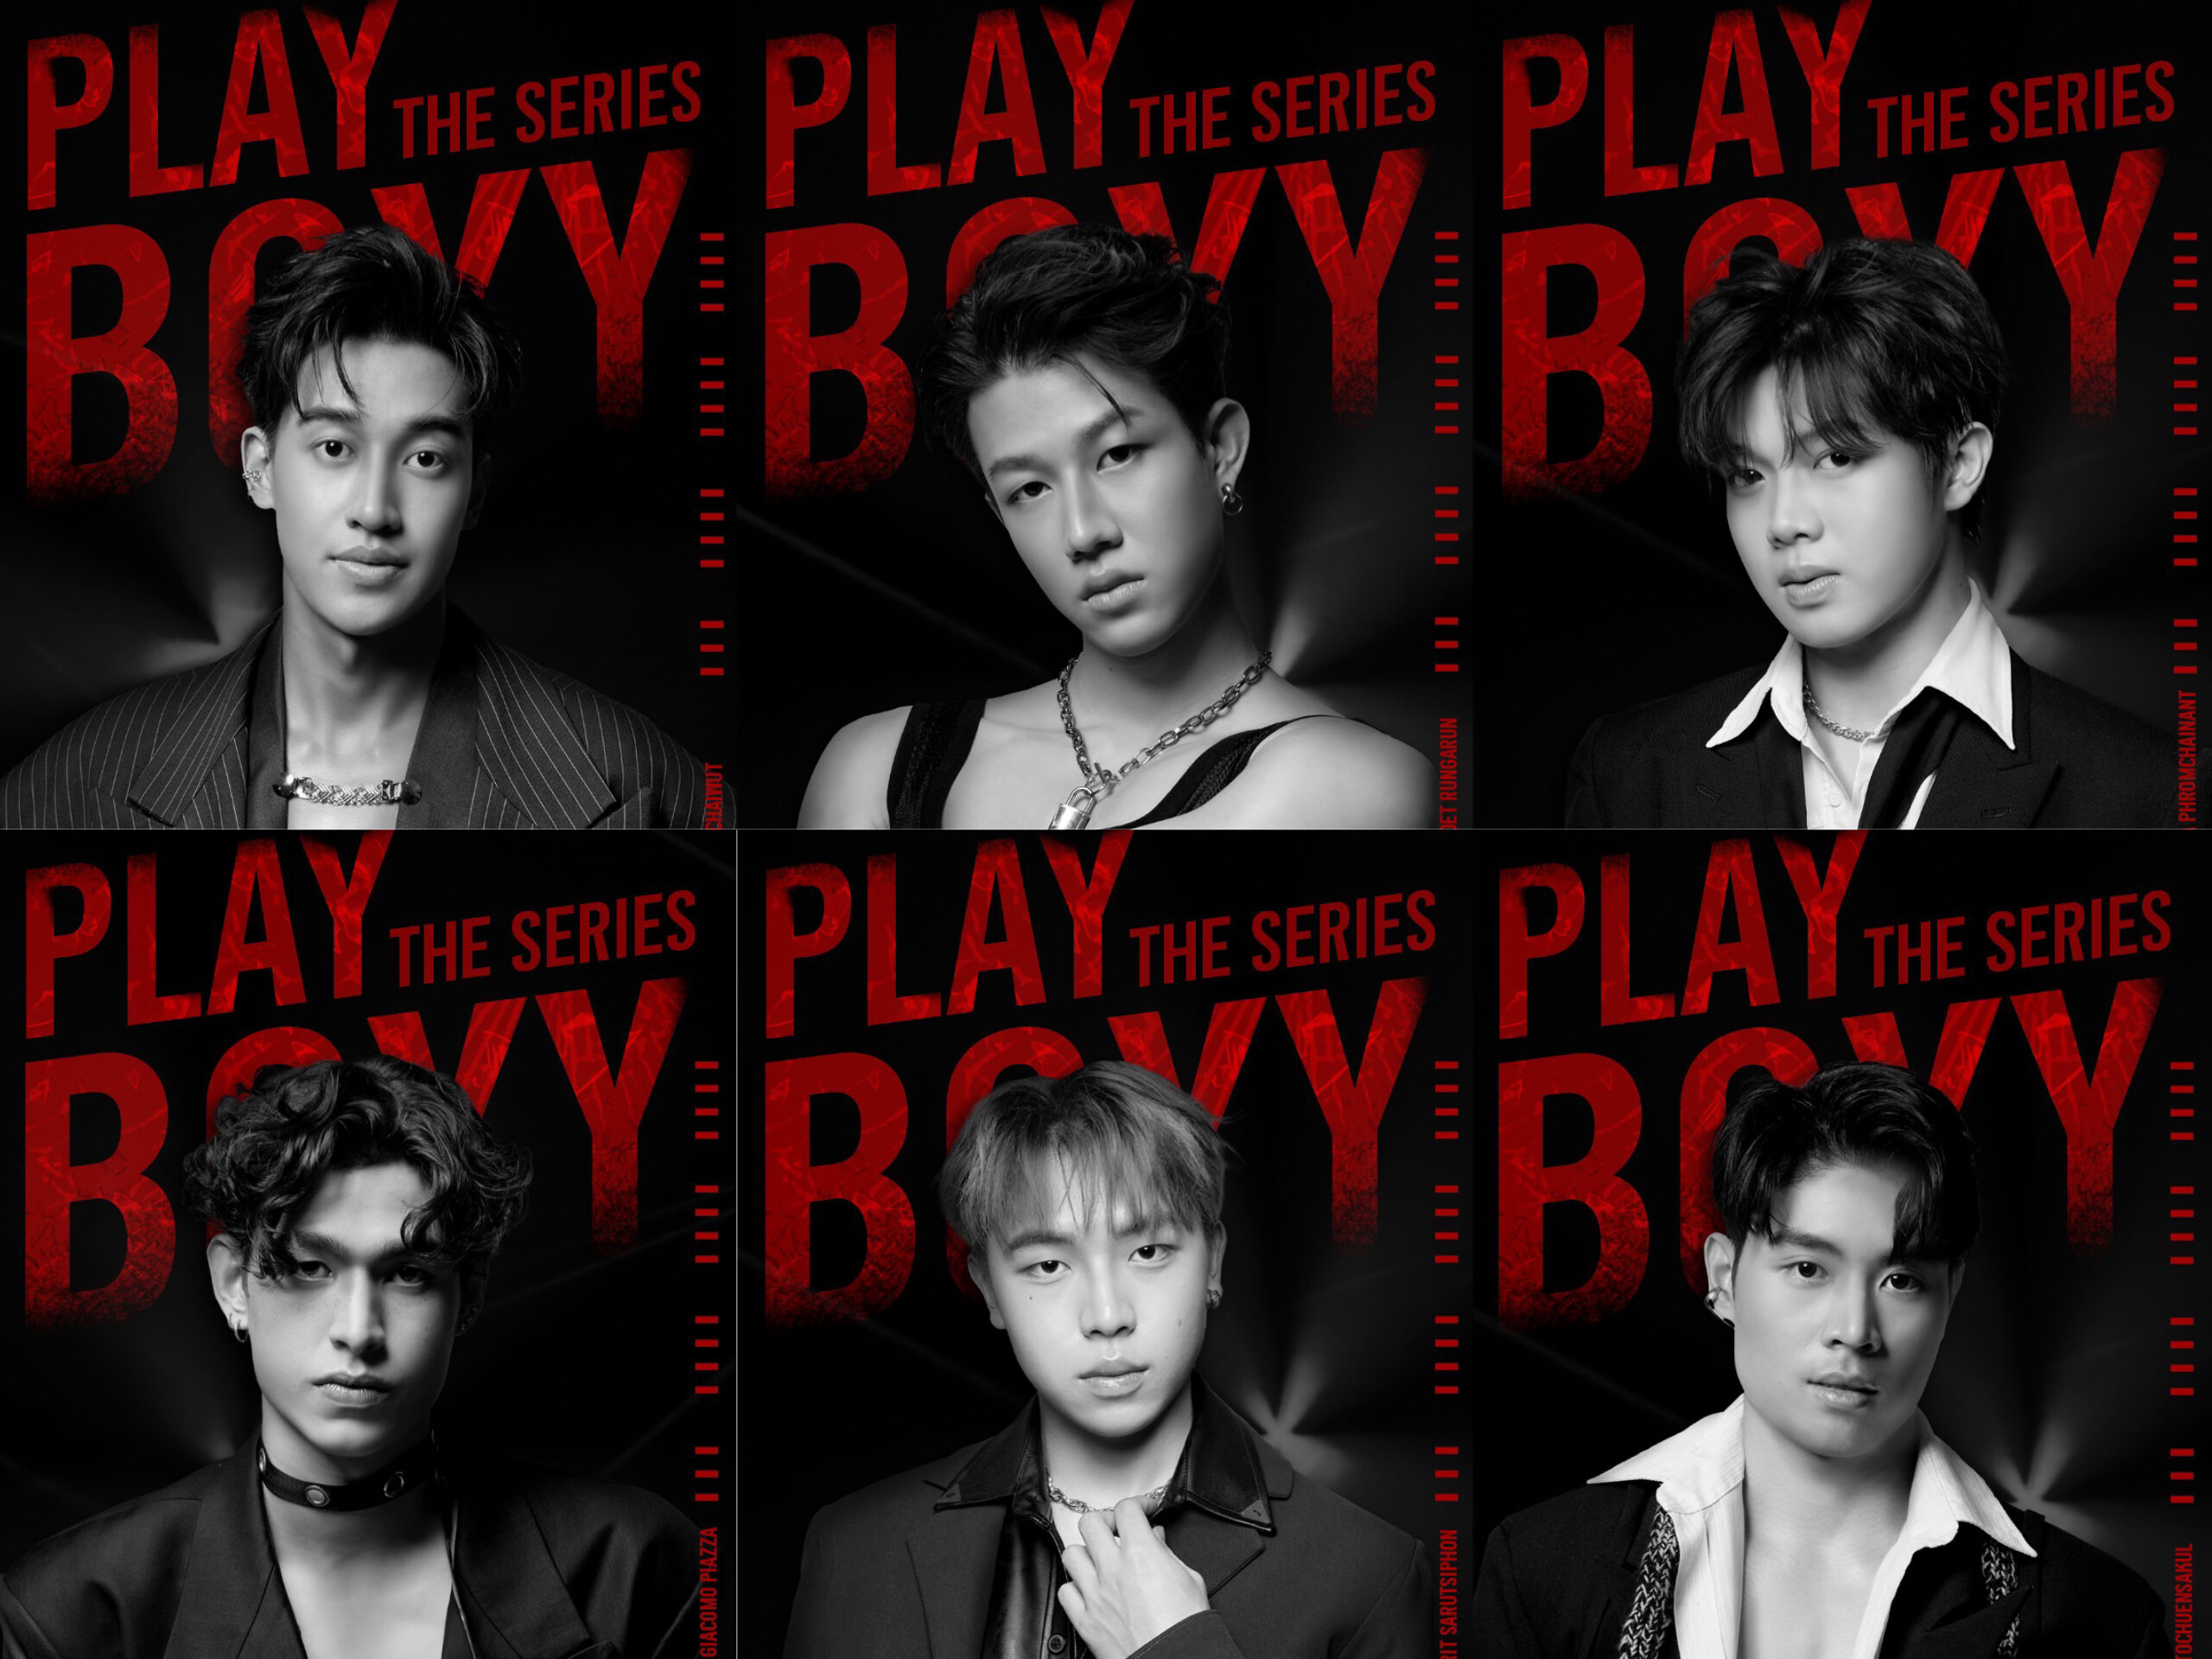 Playboyy The Series': Copy A Bangkok's Newest BL Project - BLTai